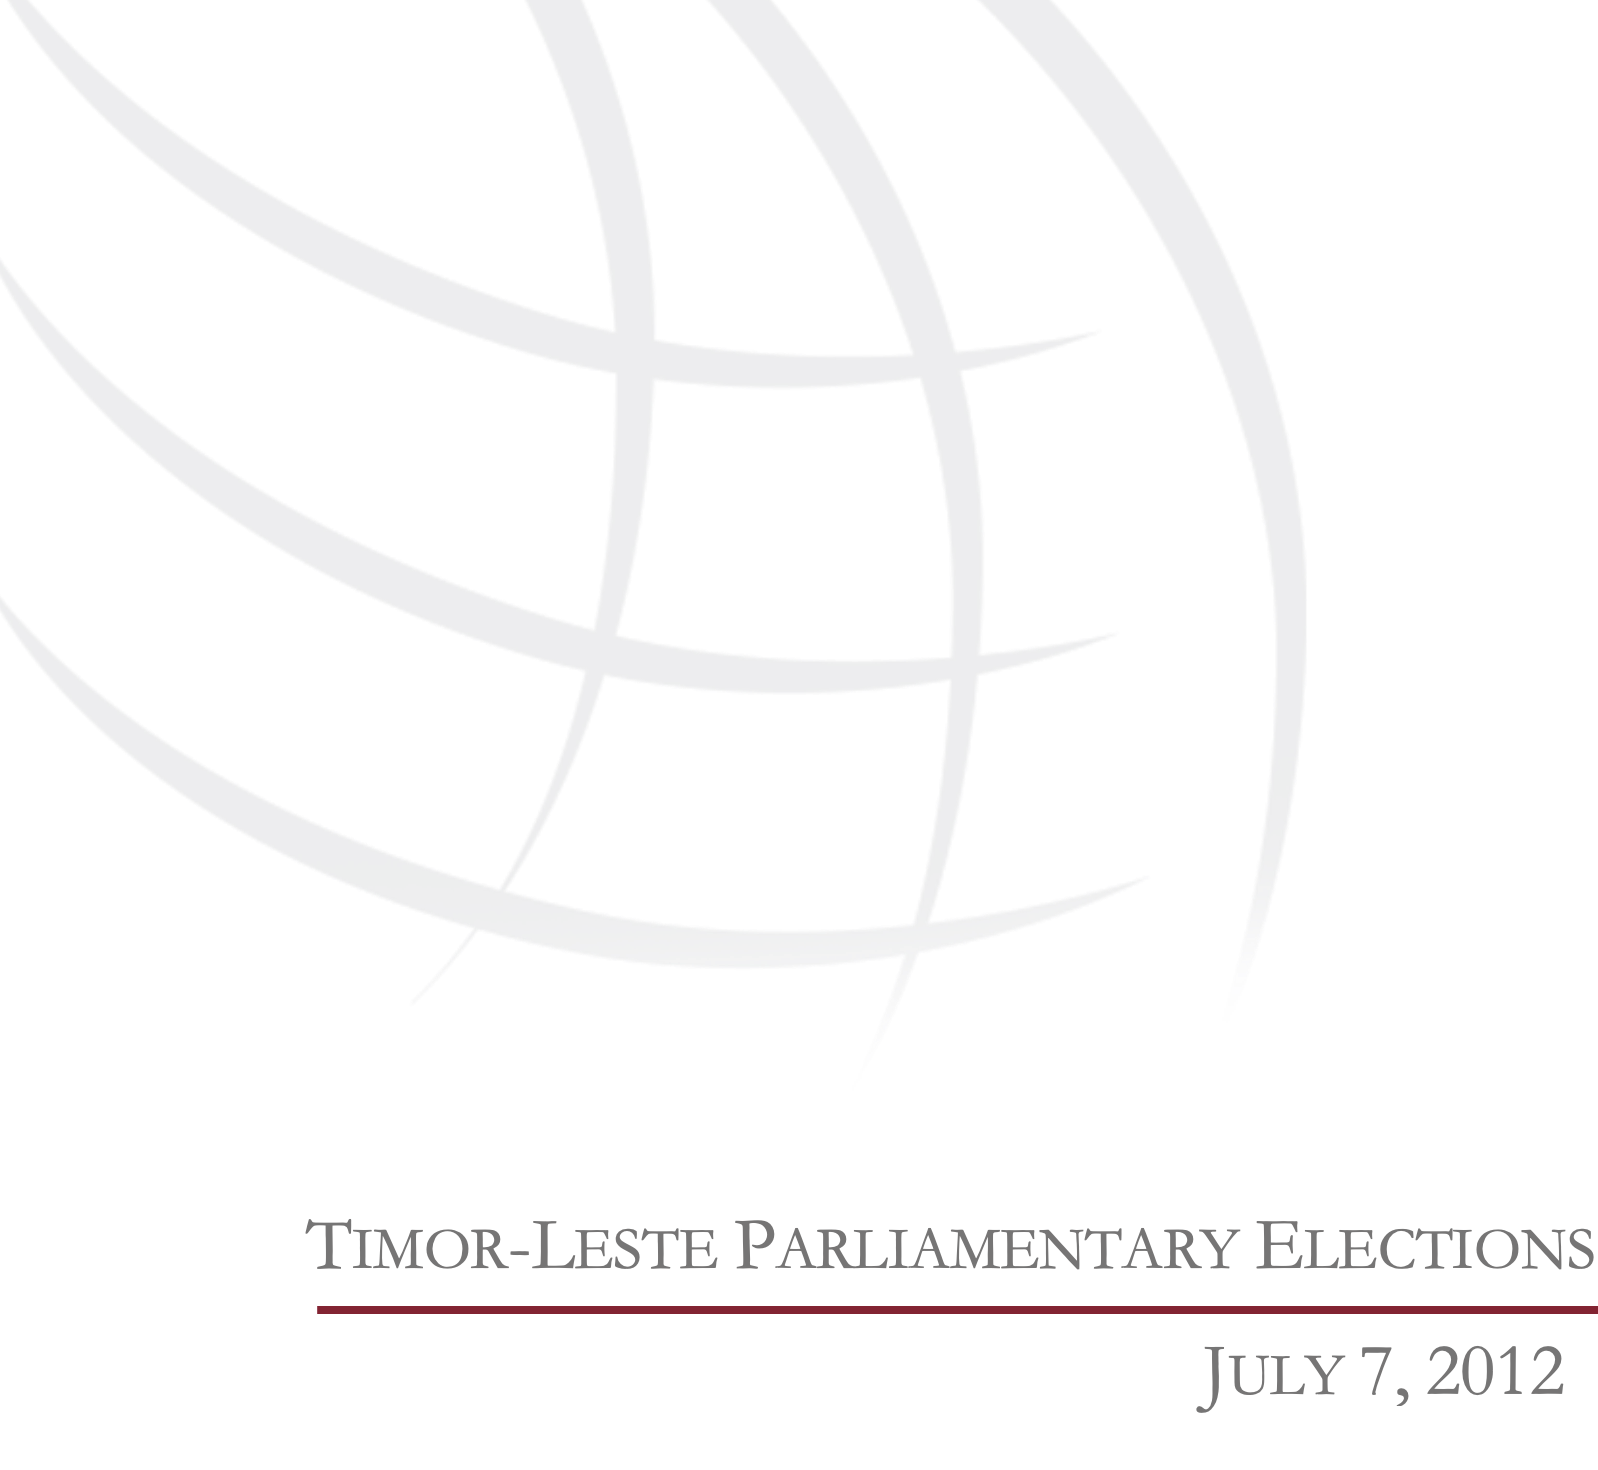 TIMOR-LESTE PARLIAMENTARY ELECTIONS JULY 7, 2012